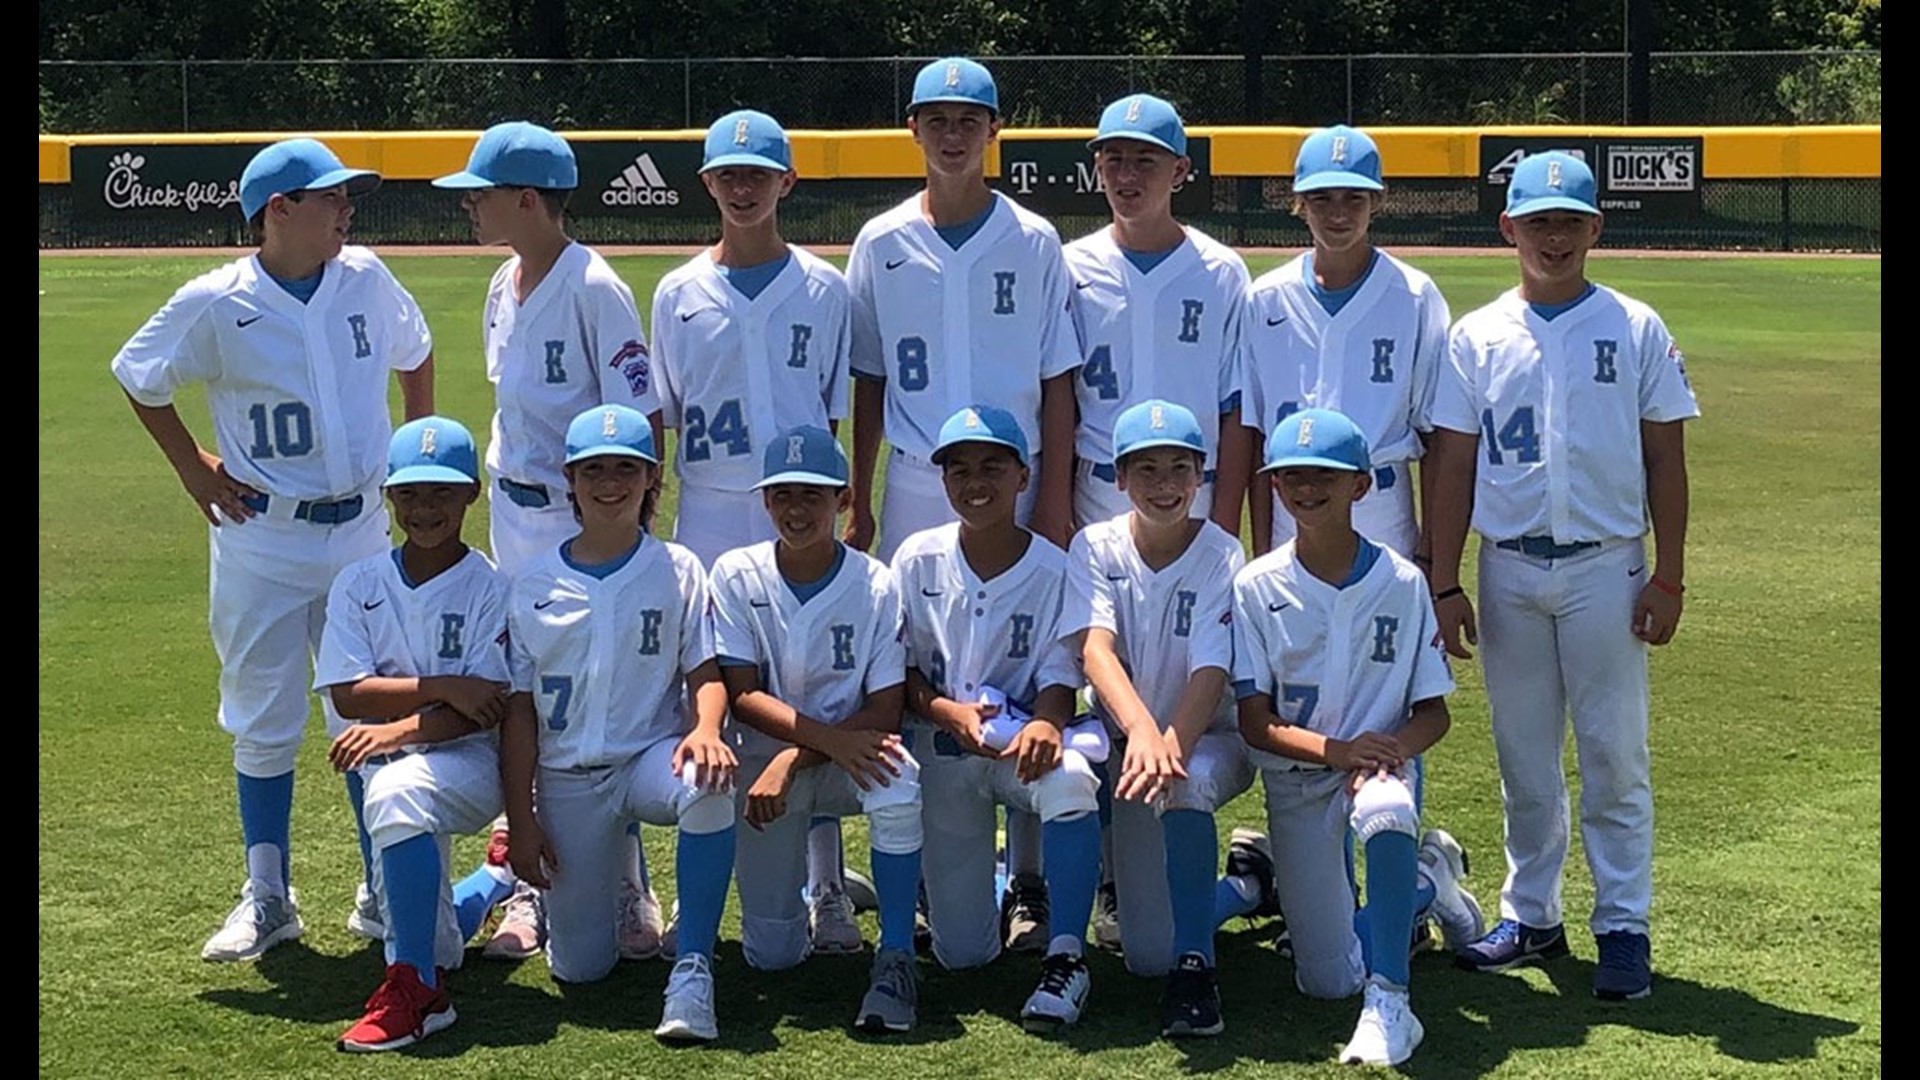 River Ridgebased youth baseball team on way to Little League World